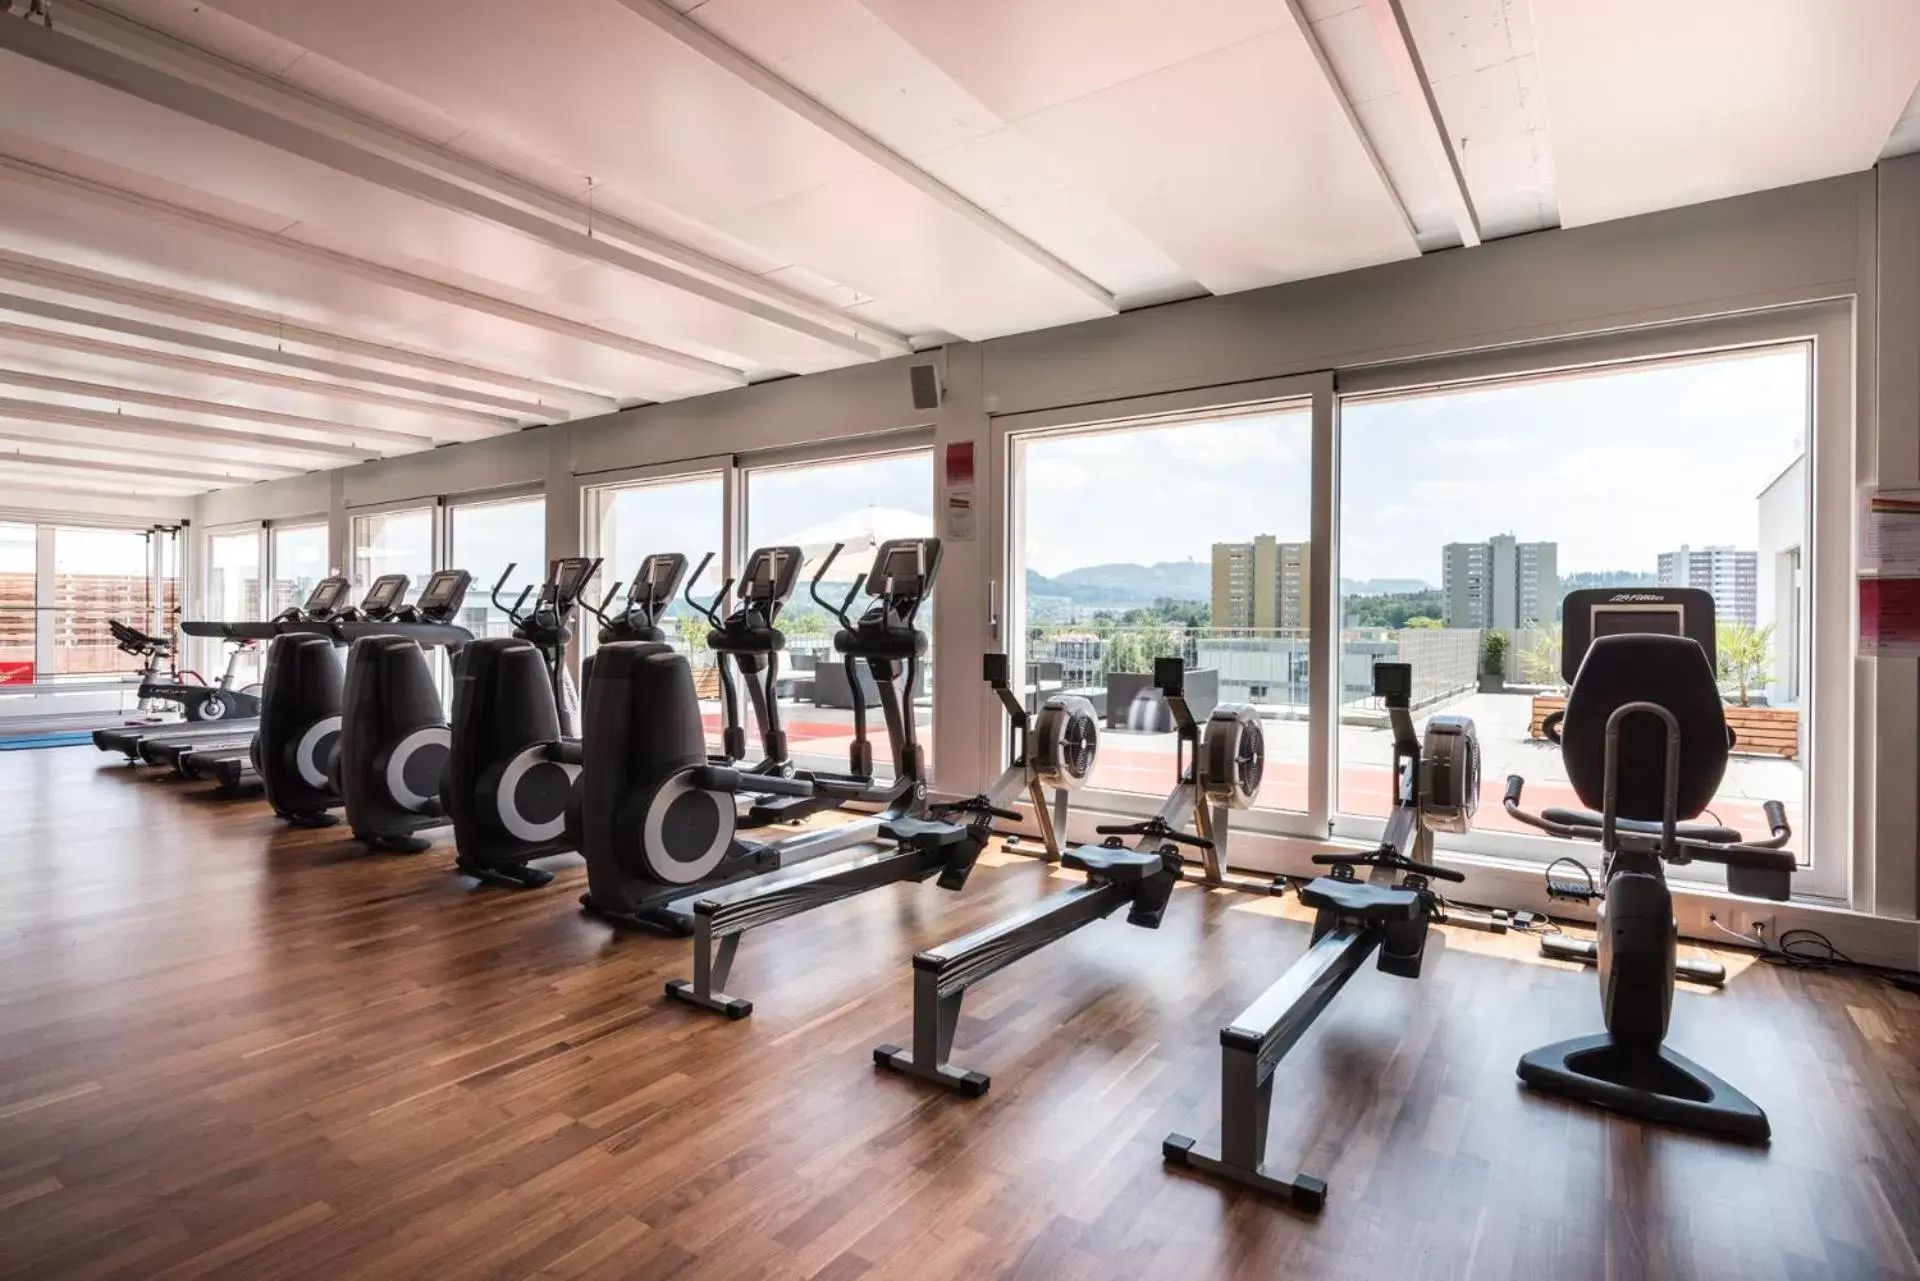 Fitness centre/facilities, Fitness Center/Facilities in NEW OPENING 2022 - Los Lorentes Hotel Bern City